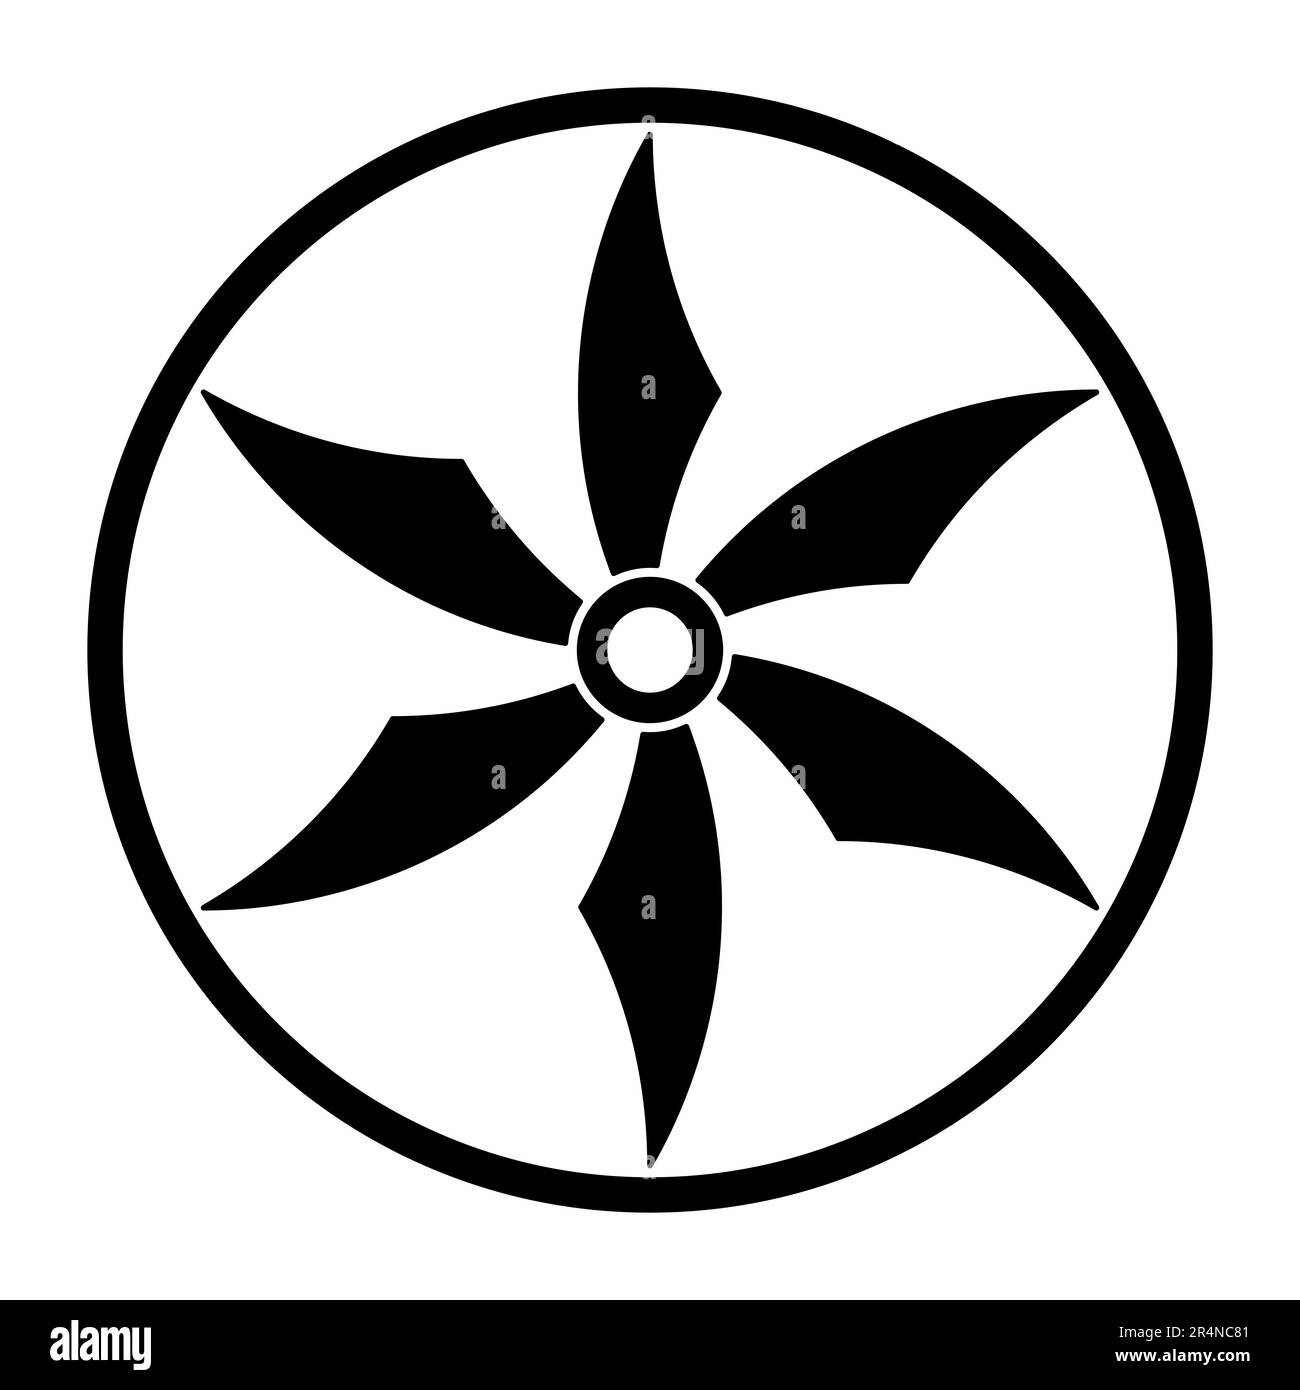 https://c8.alamy.com/comp/2R4NC81/six-pointed-star-in-circle-a-symbol-similar-to-a-wheel-shuriken-a-japanese-concealed-weapon-also-known-as-throwing-or-ninja-star-2R4NC81.jpg